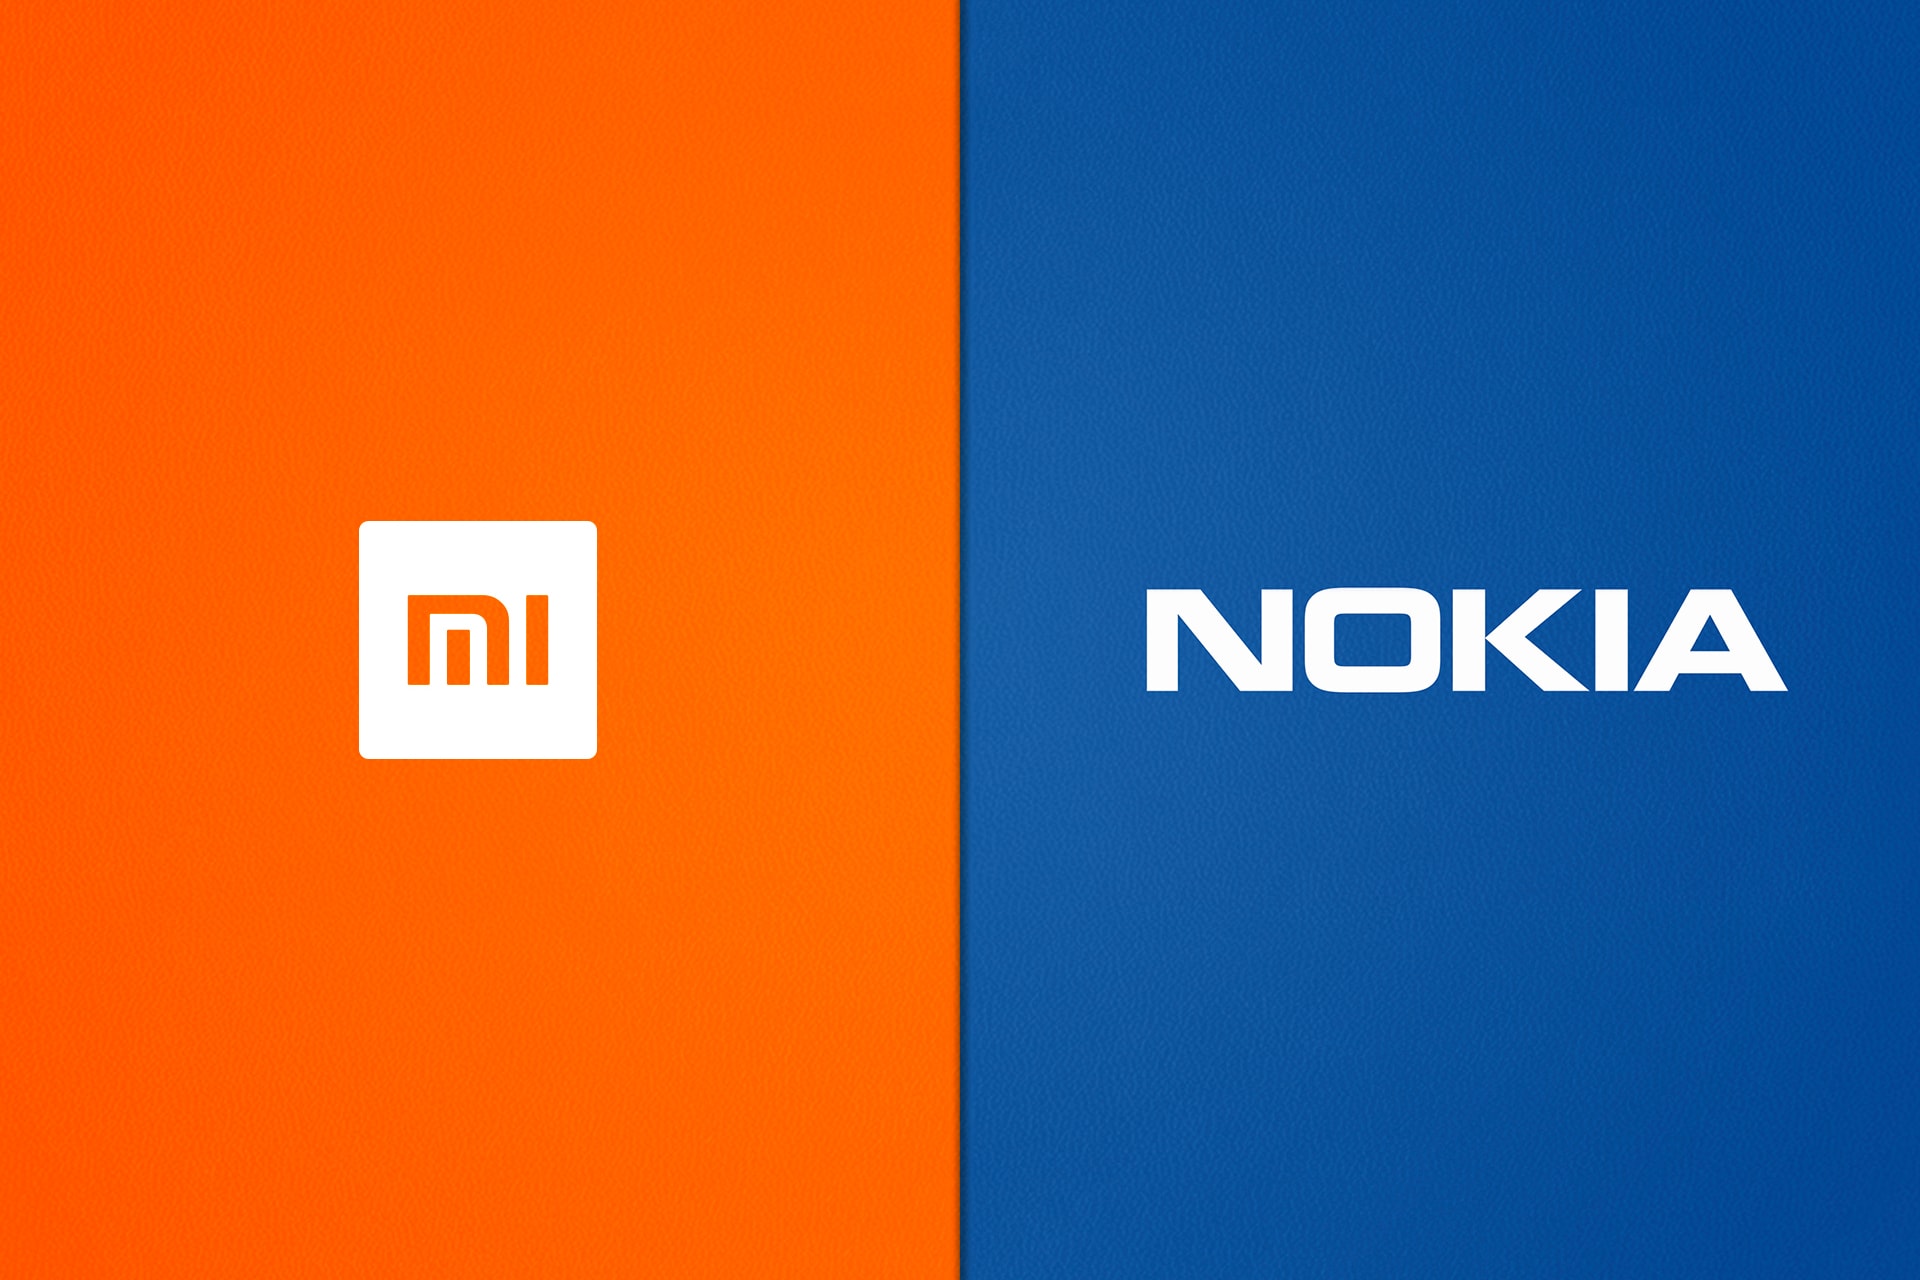 Xiaomi Nokia Business Cooperation Patent Agreements